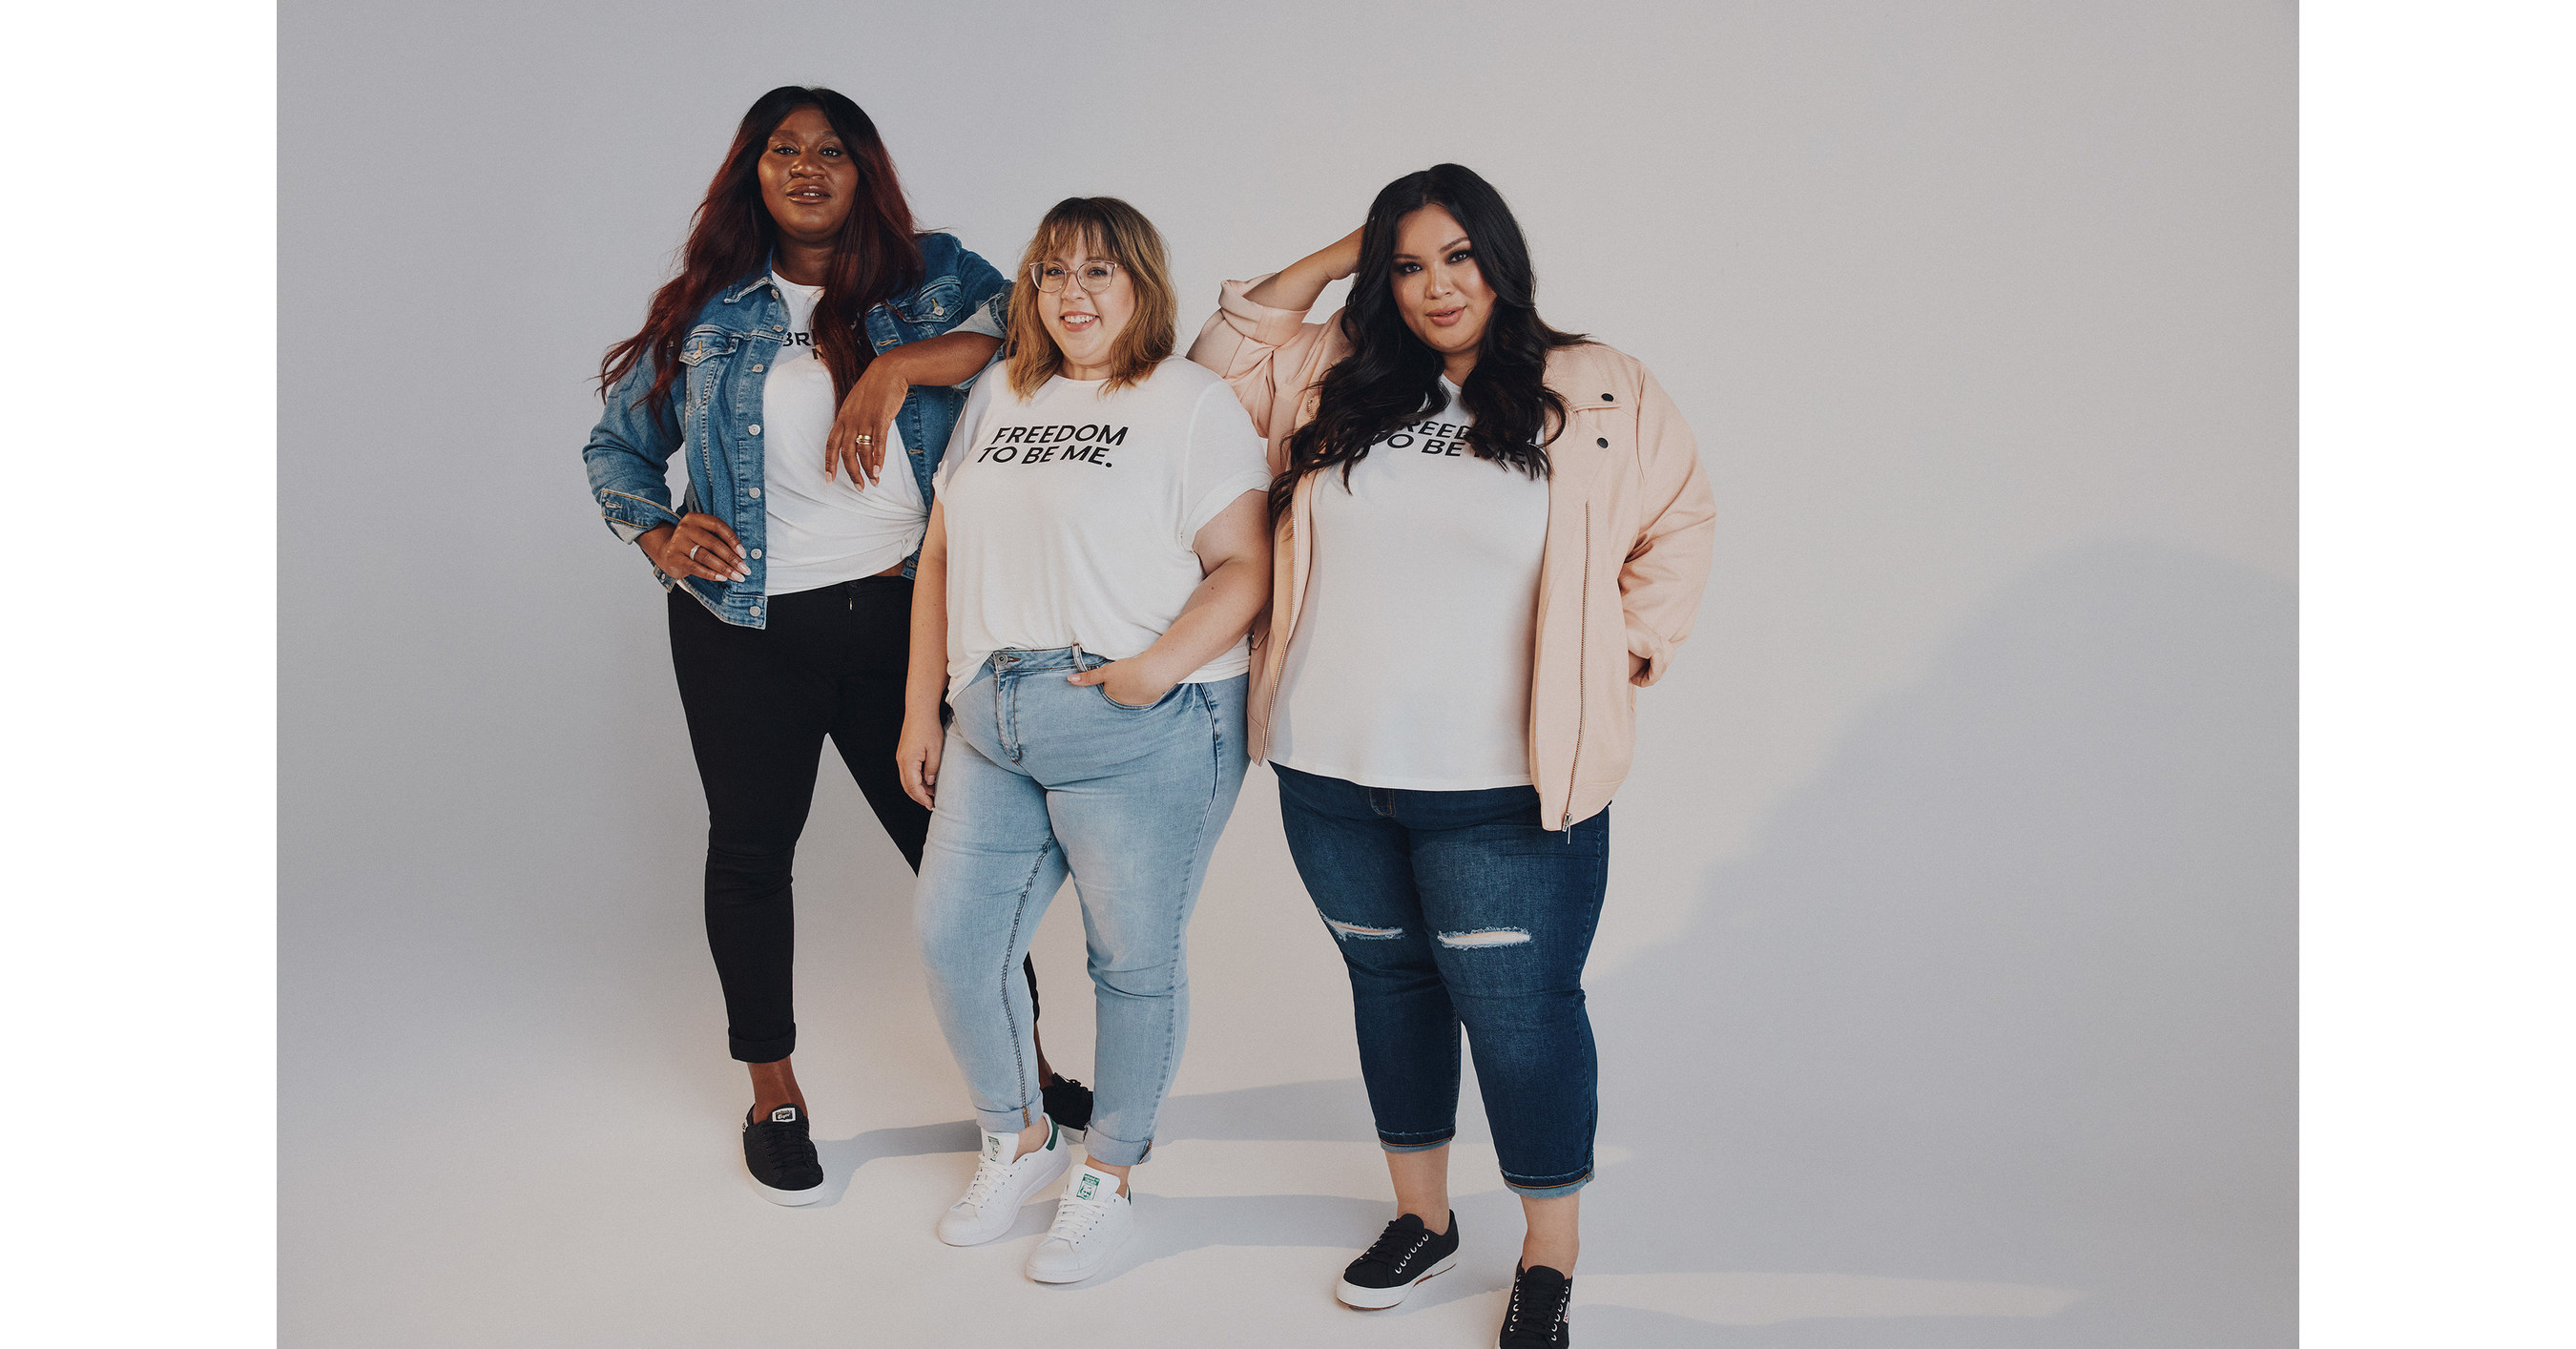 Penningtons launches the 'Freedom to Be Me.' Campaign celebrating all women